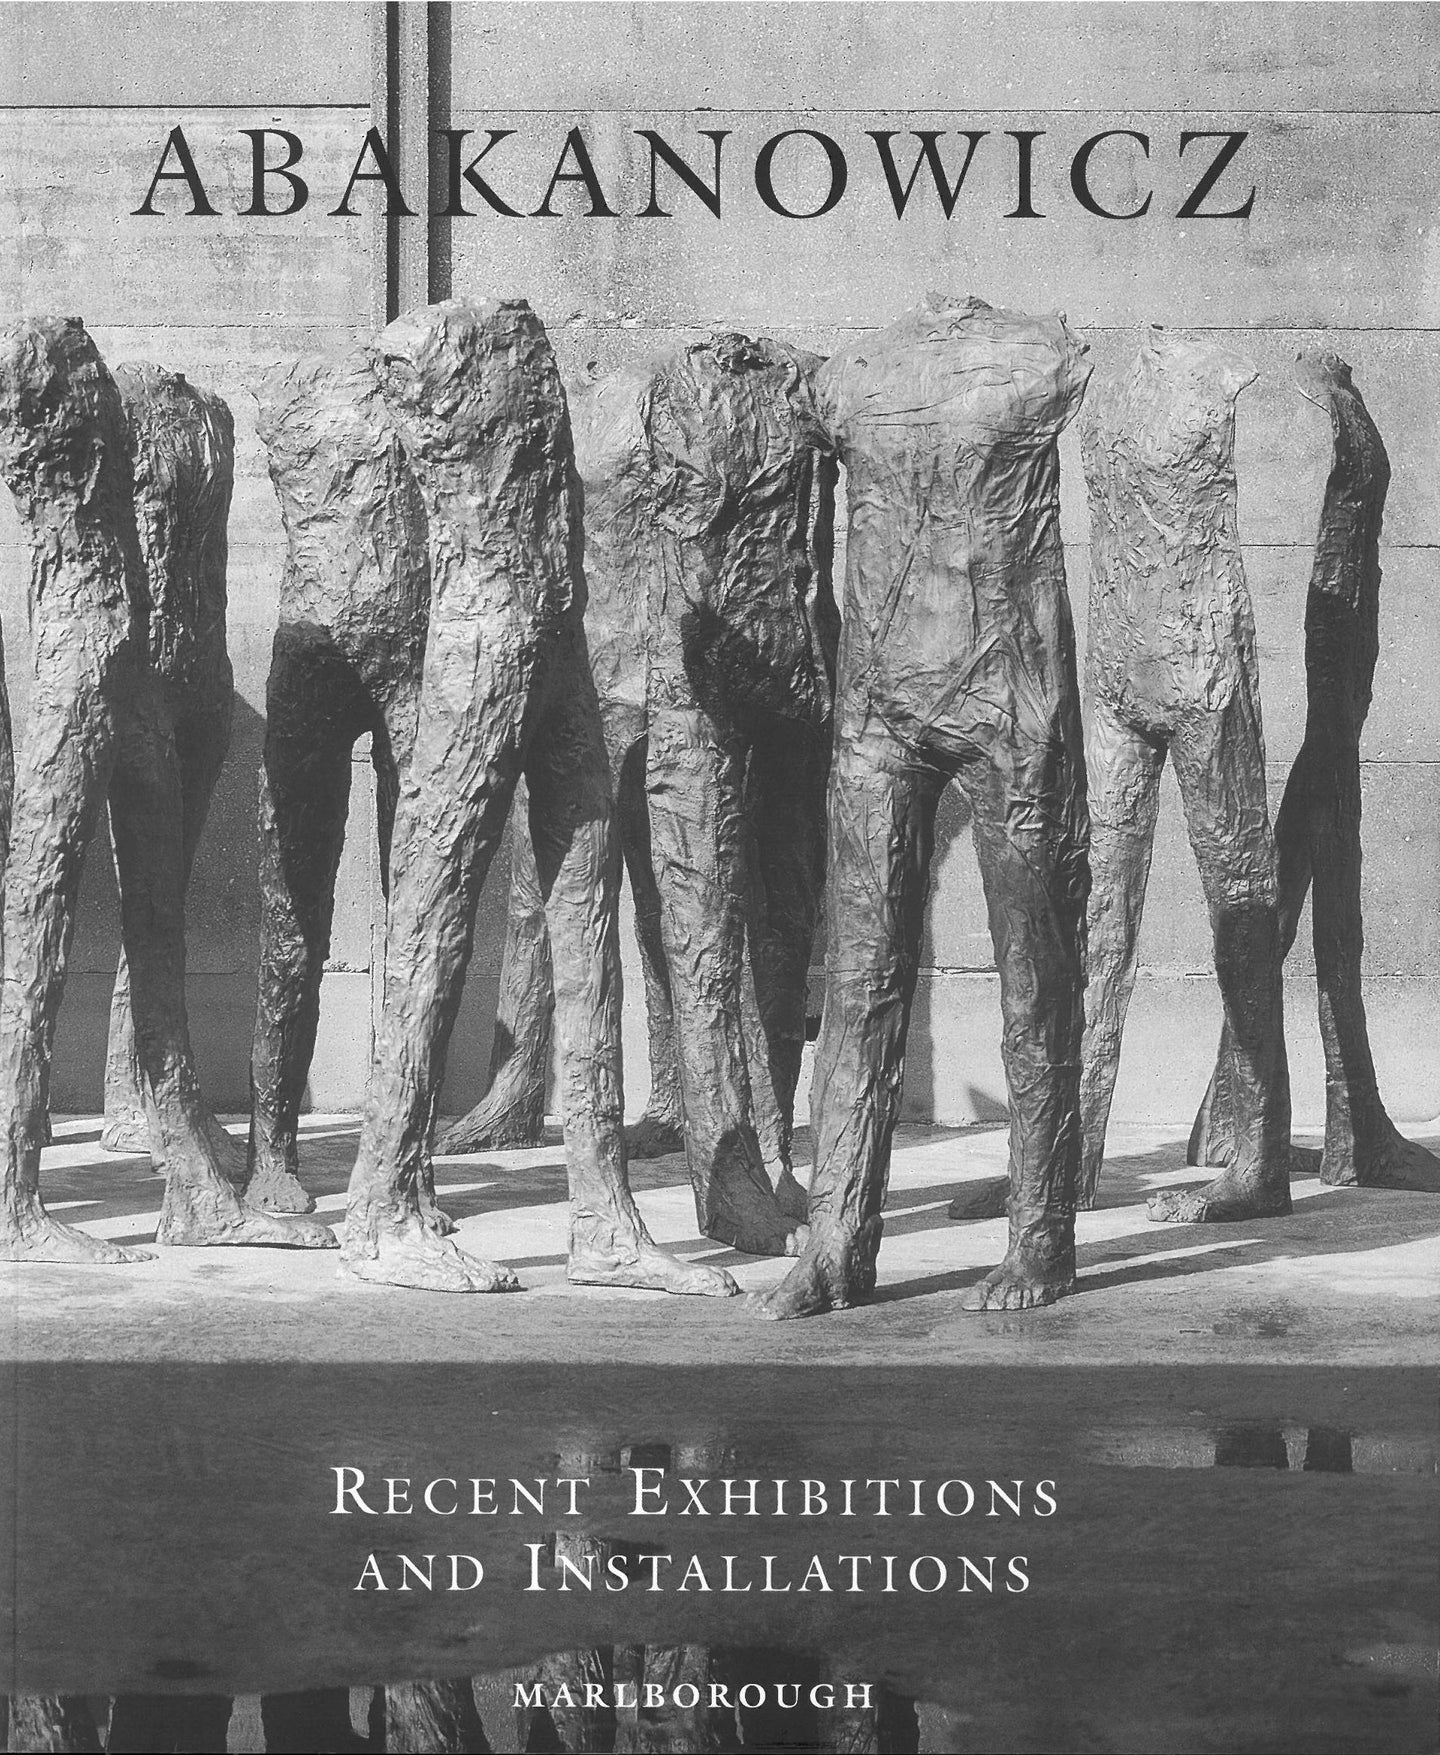 Abakanowicz catalogue featuring several bronze standing figures in black and white